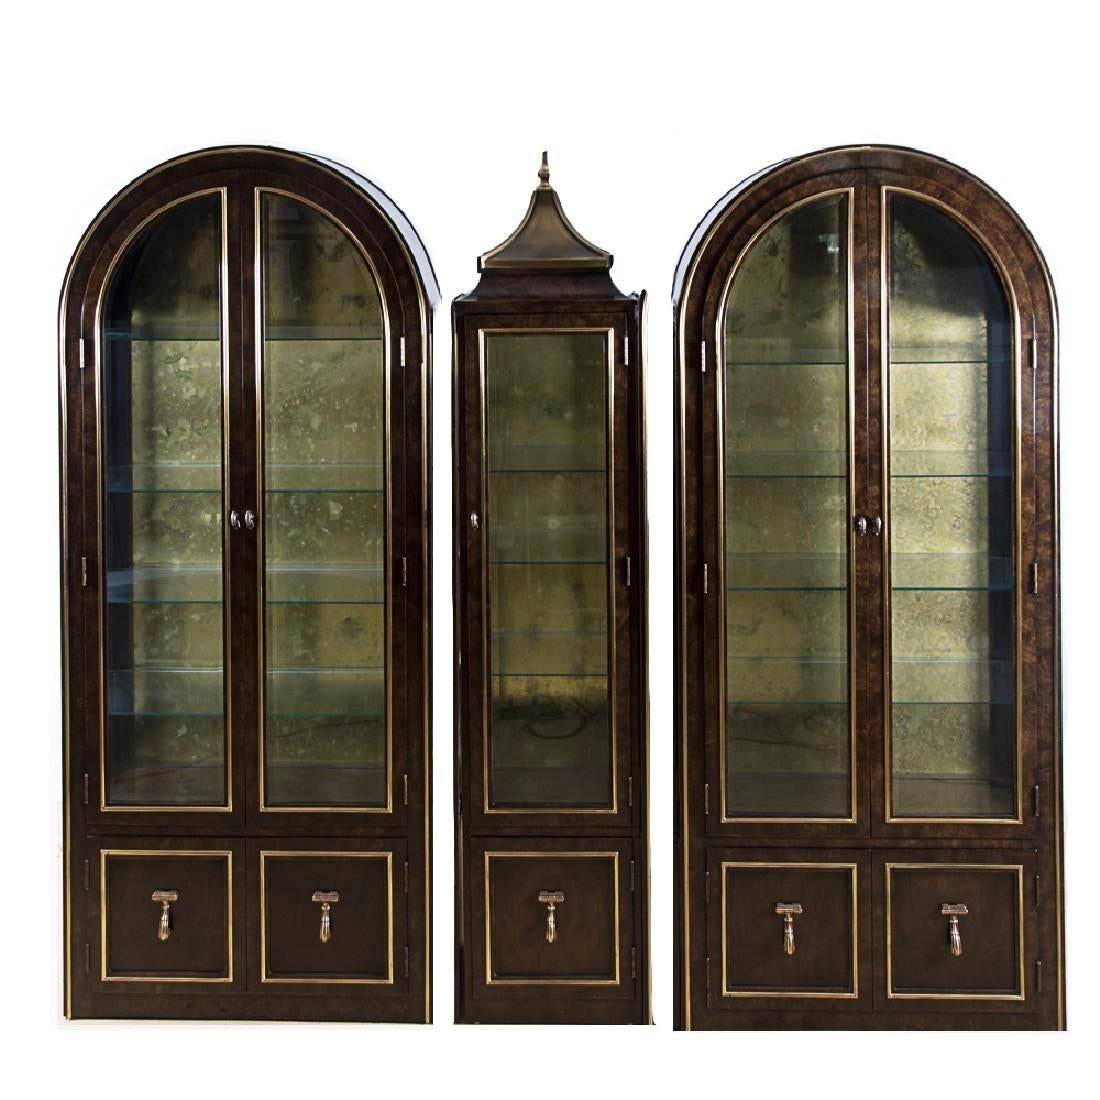 A set of three William Doezema for Mastercraft display cabinets, 20th century. Each featuring an eye-catching burled Amboyna wood
Three freestanding parts: two large round-top burl wood side cabinets. The middle tall narrow cabinet having a brass